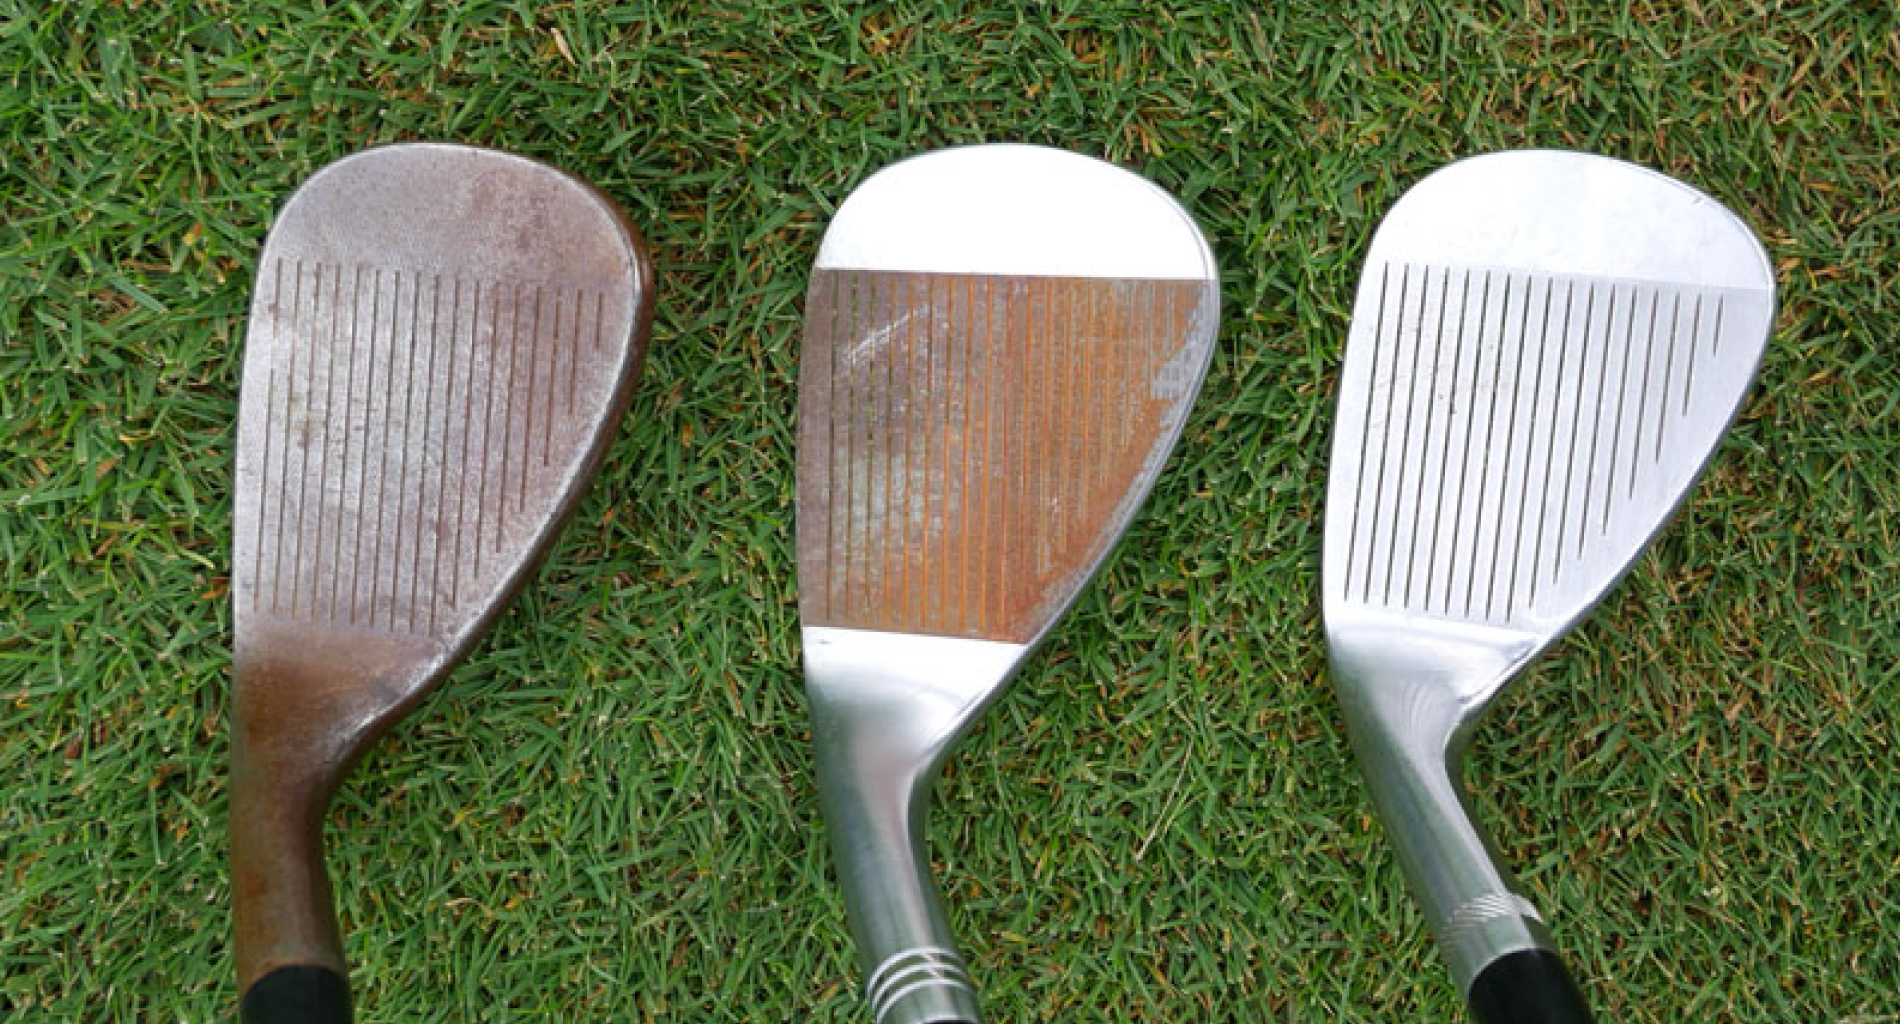 Golf Shaft Tips: Keeping Your Equipment In Top Condition